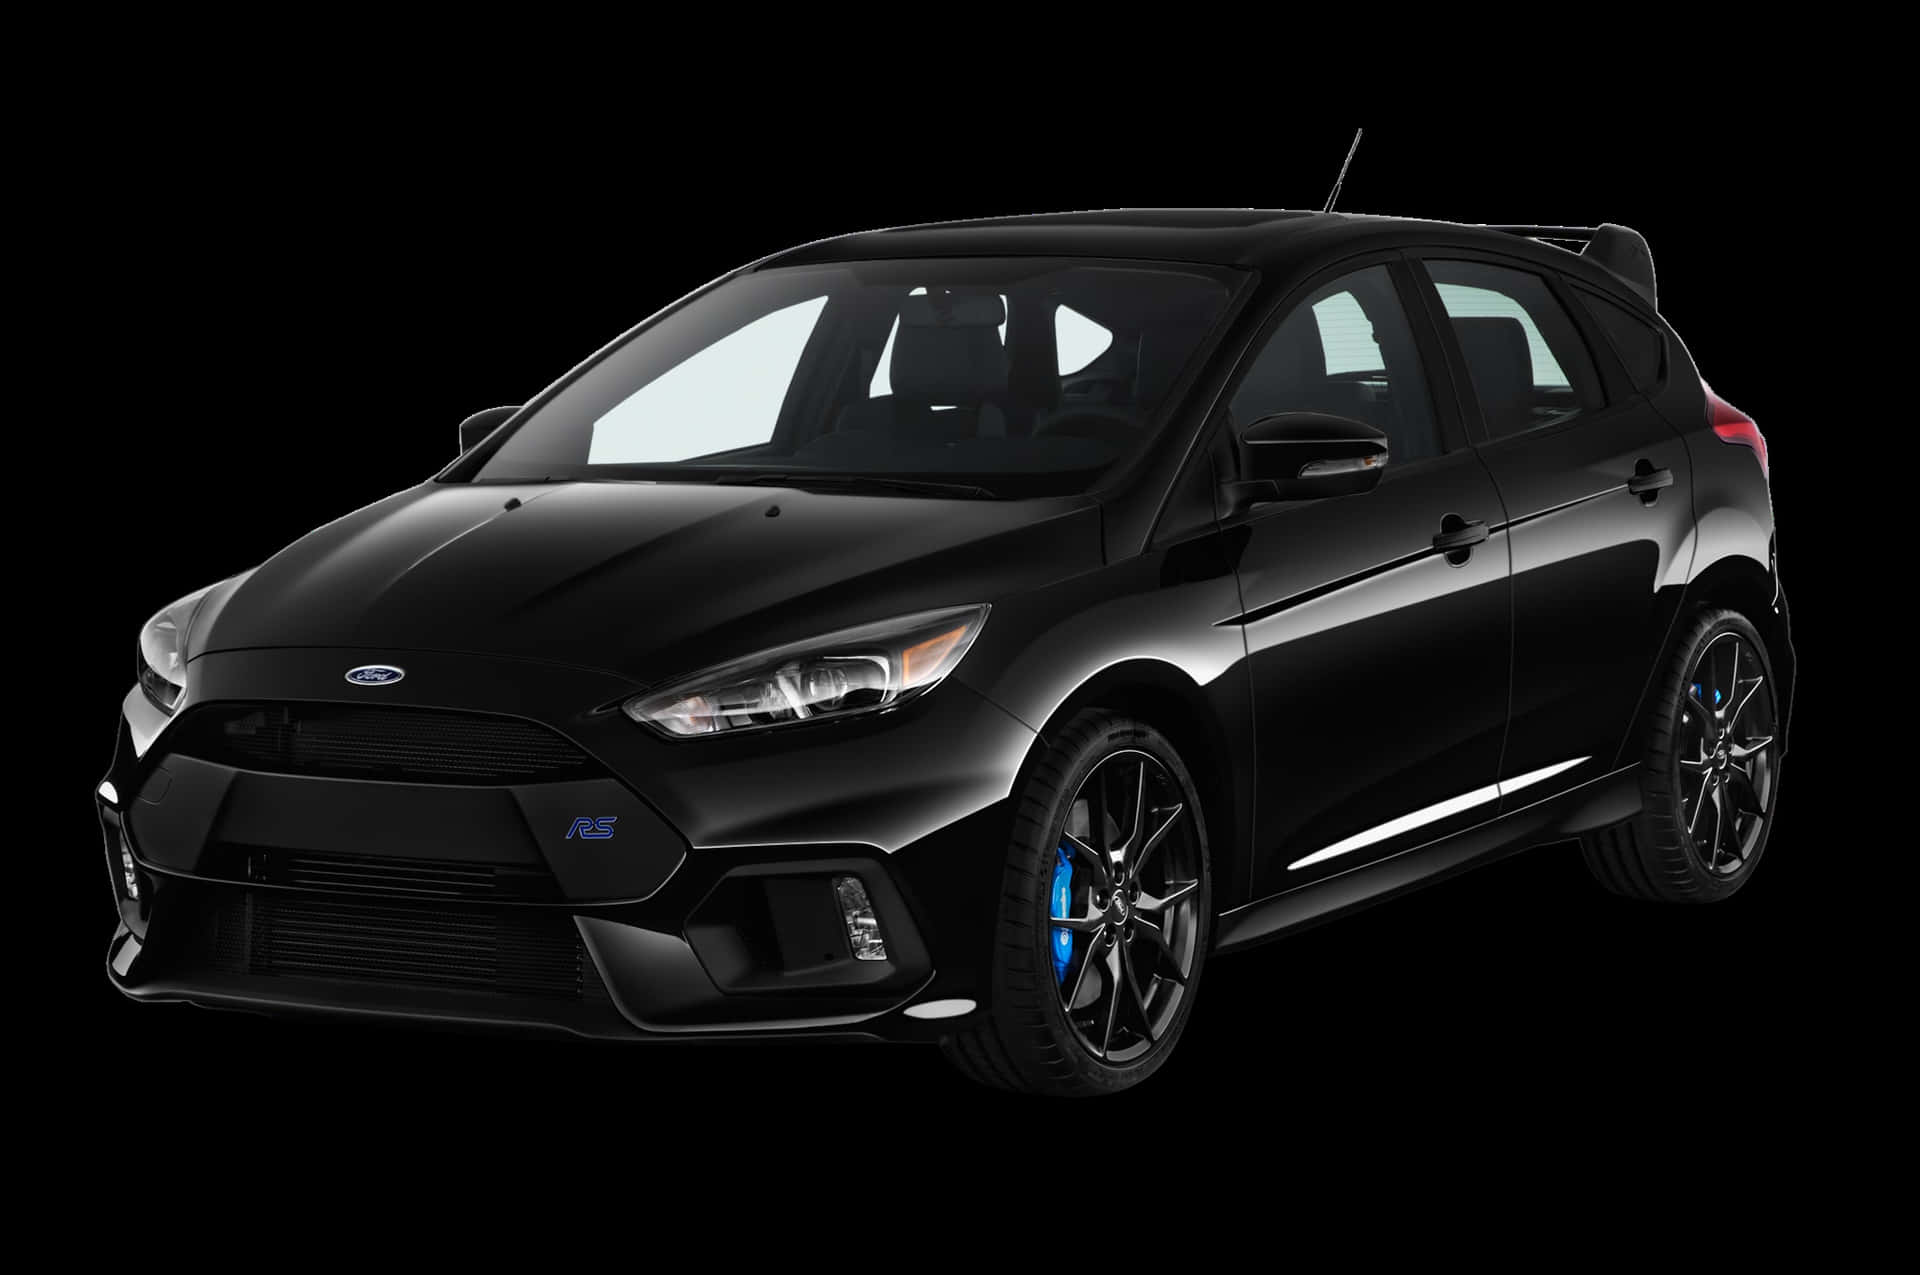 Sleek and Stylish Ford Focus on the Road Wallpaper